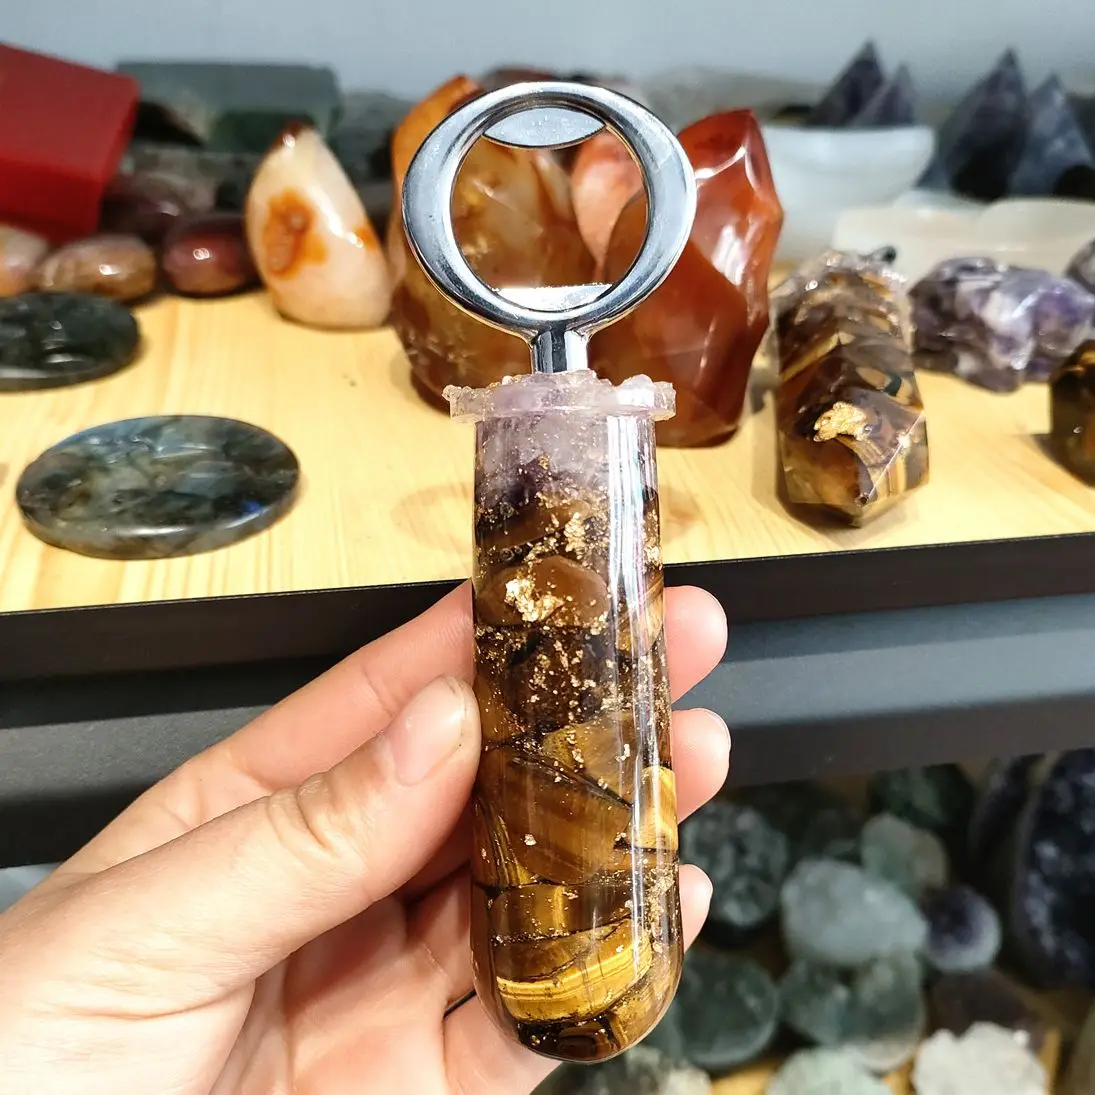 

1pcs Natural tiger eye stones and minerals tumble stone handicraft beer bottle opener resin craft